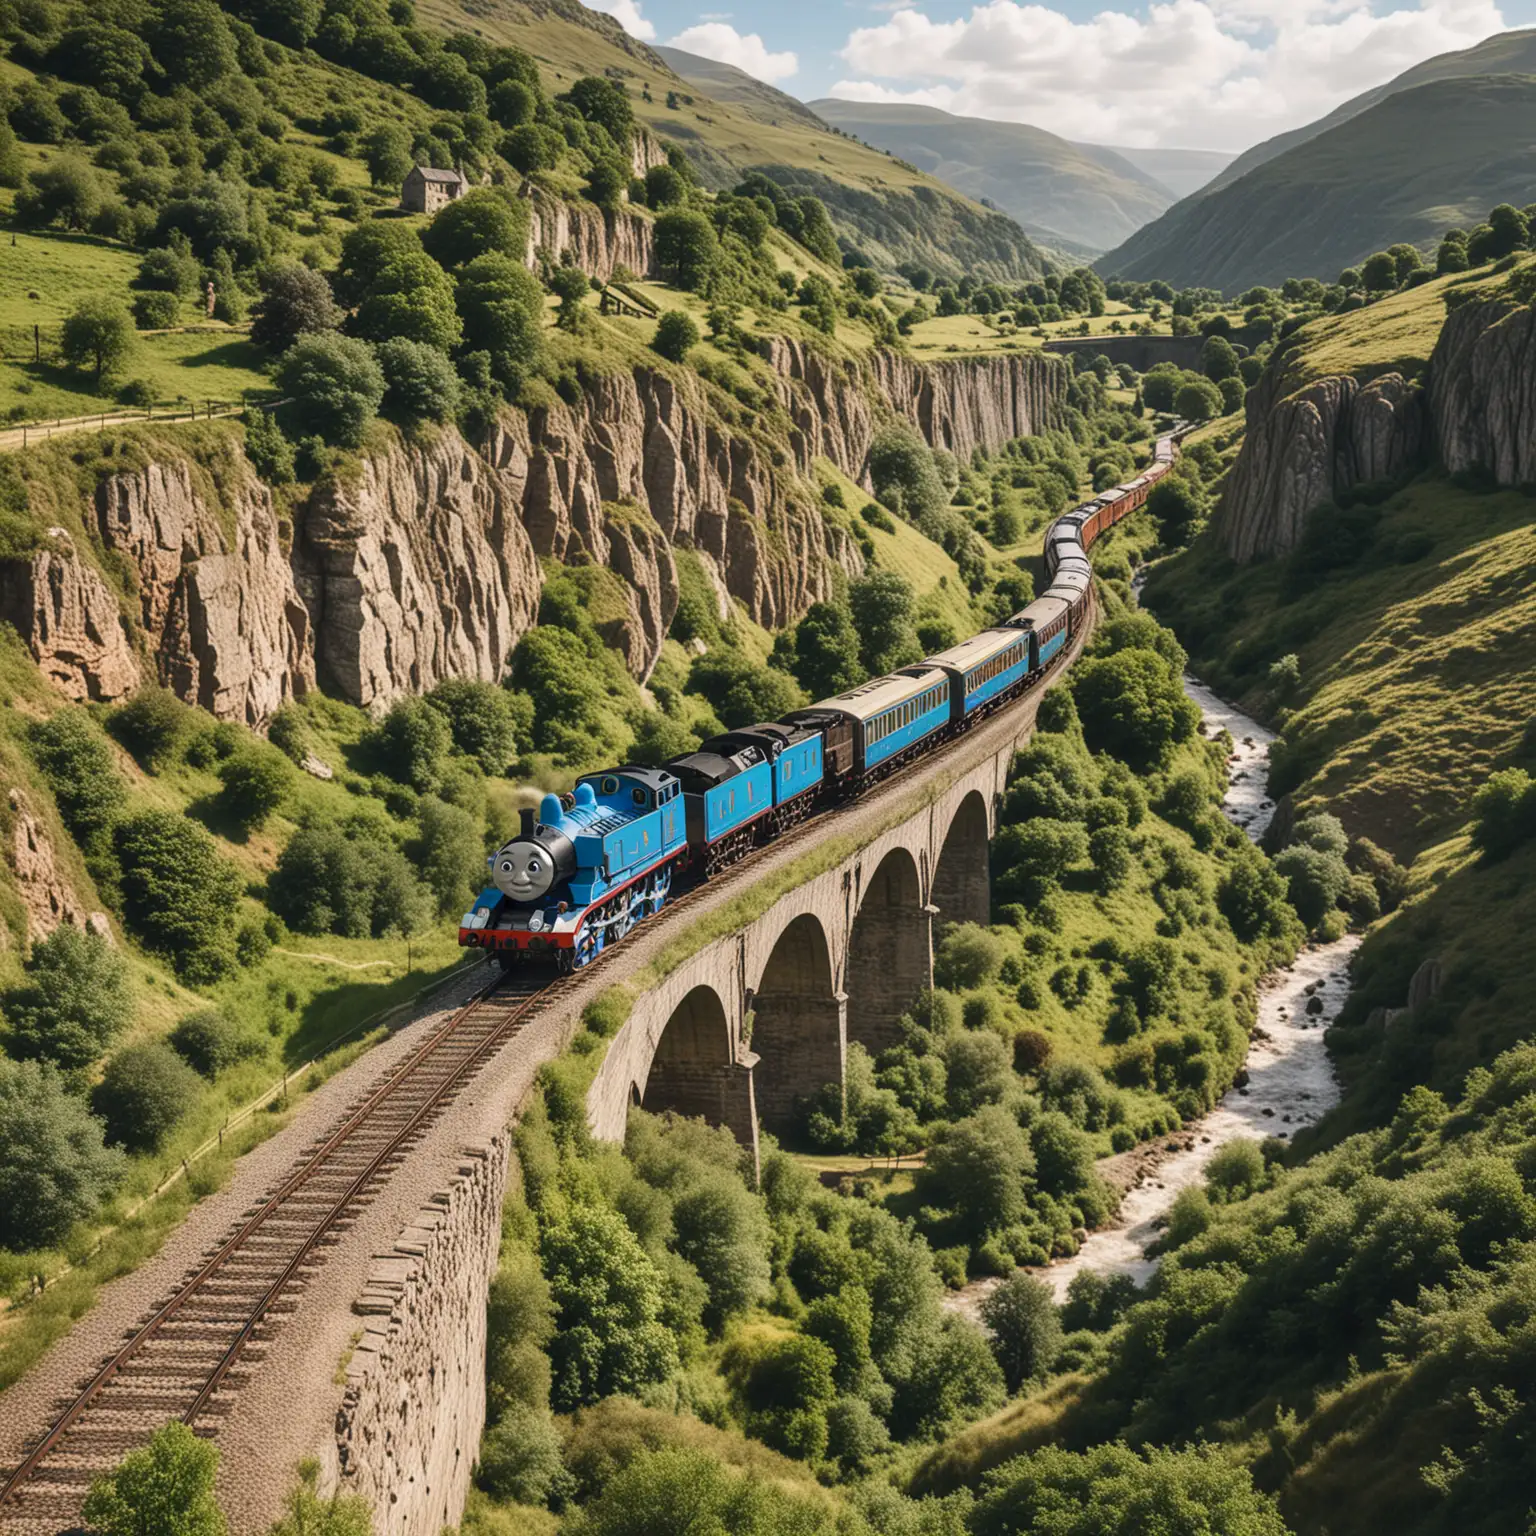 thomas the tank engine travelling through a valley